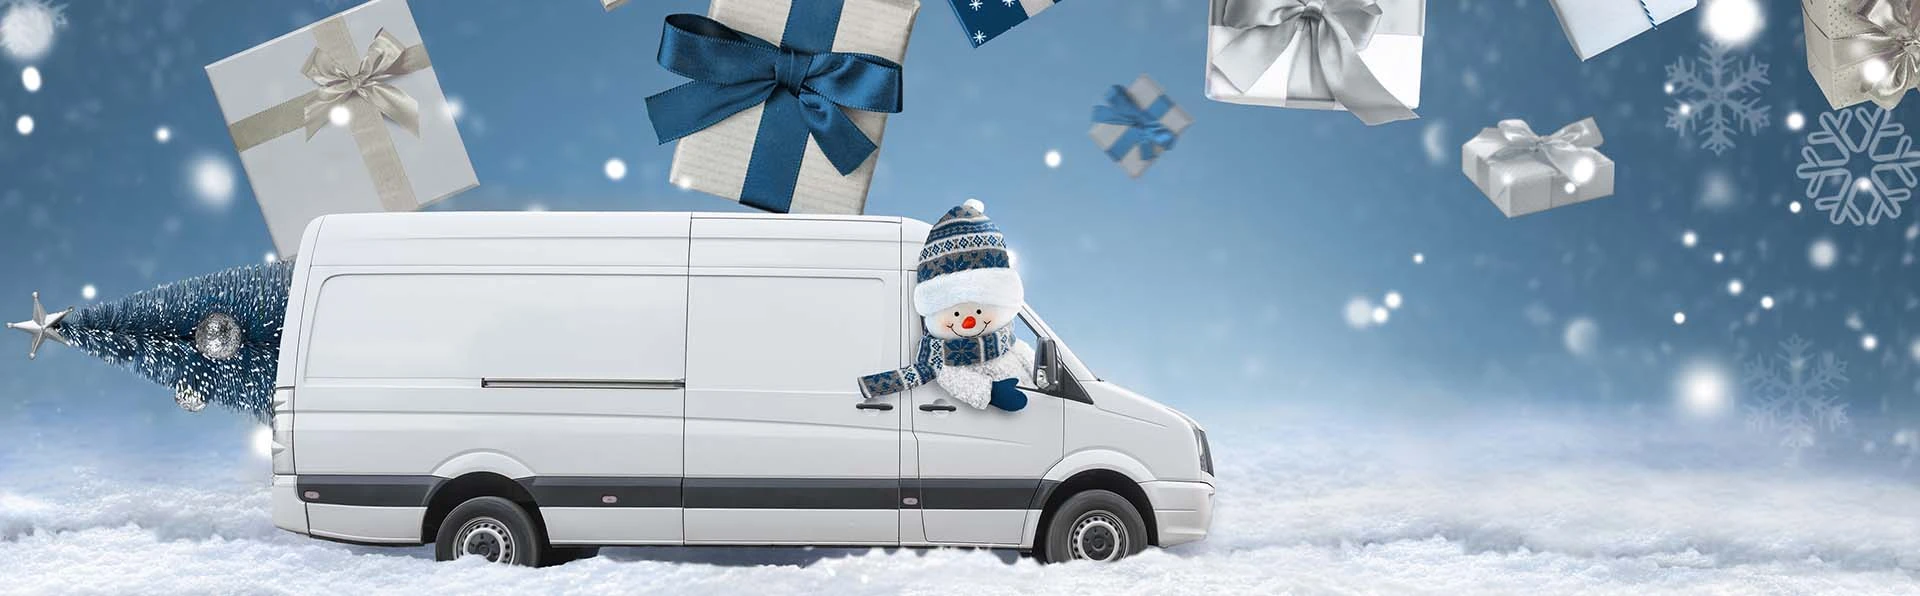 Treat Yourself to a New Van this Christmas